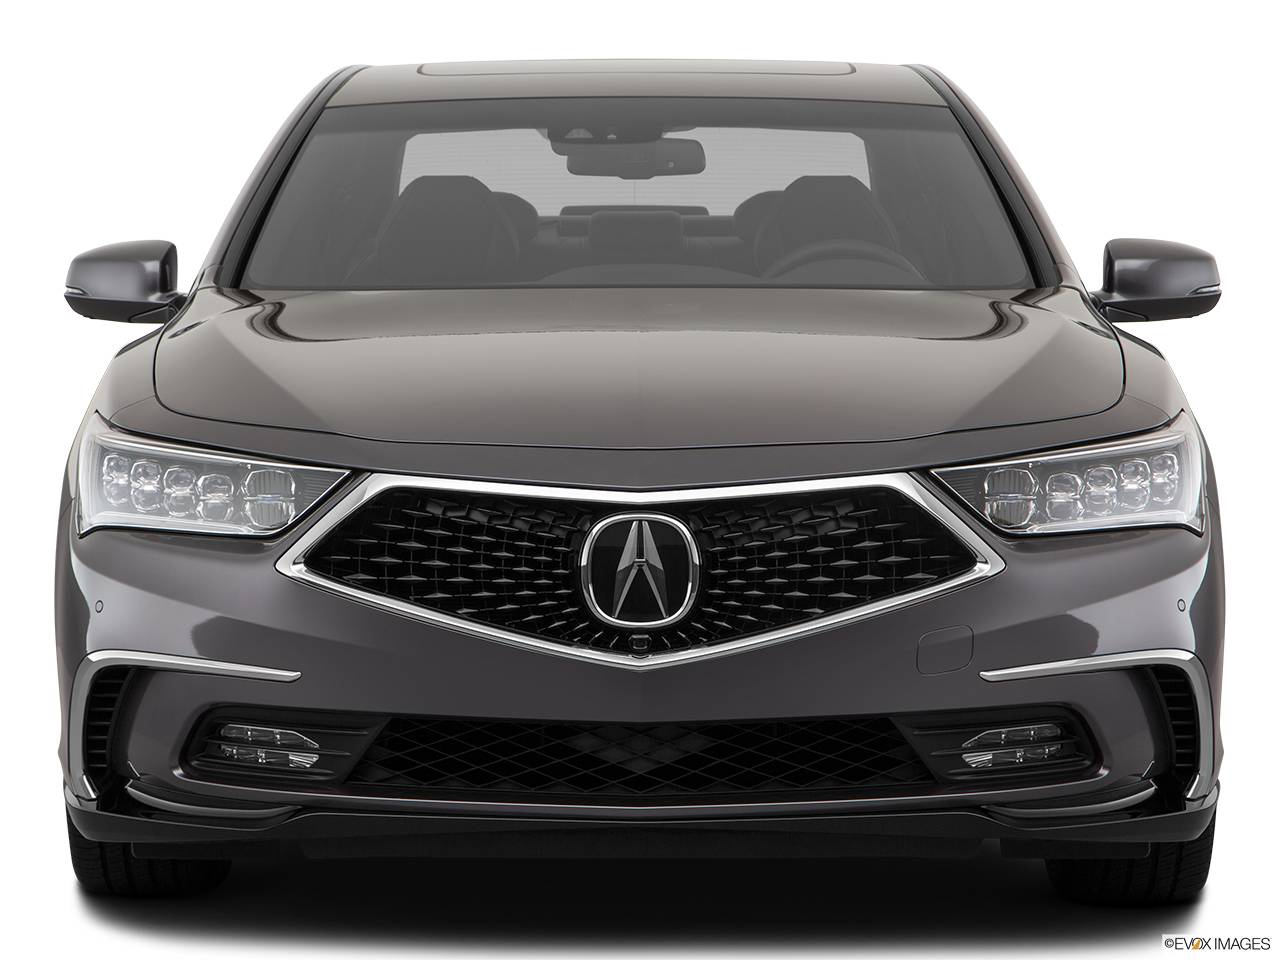 2020 Acura RLX Sport Hybrid SH-AWD Low/wide front. 